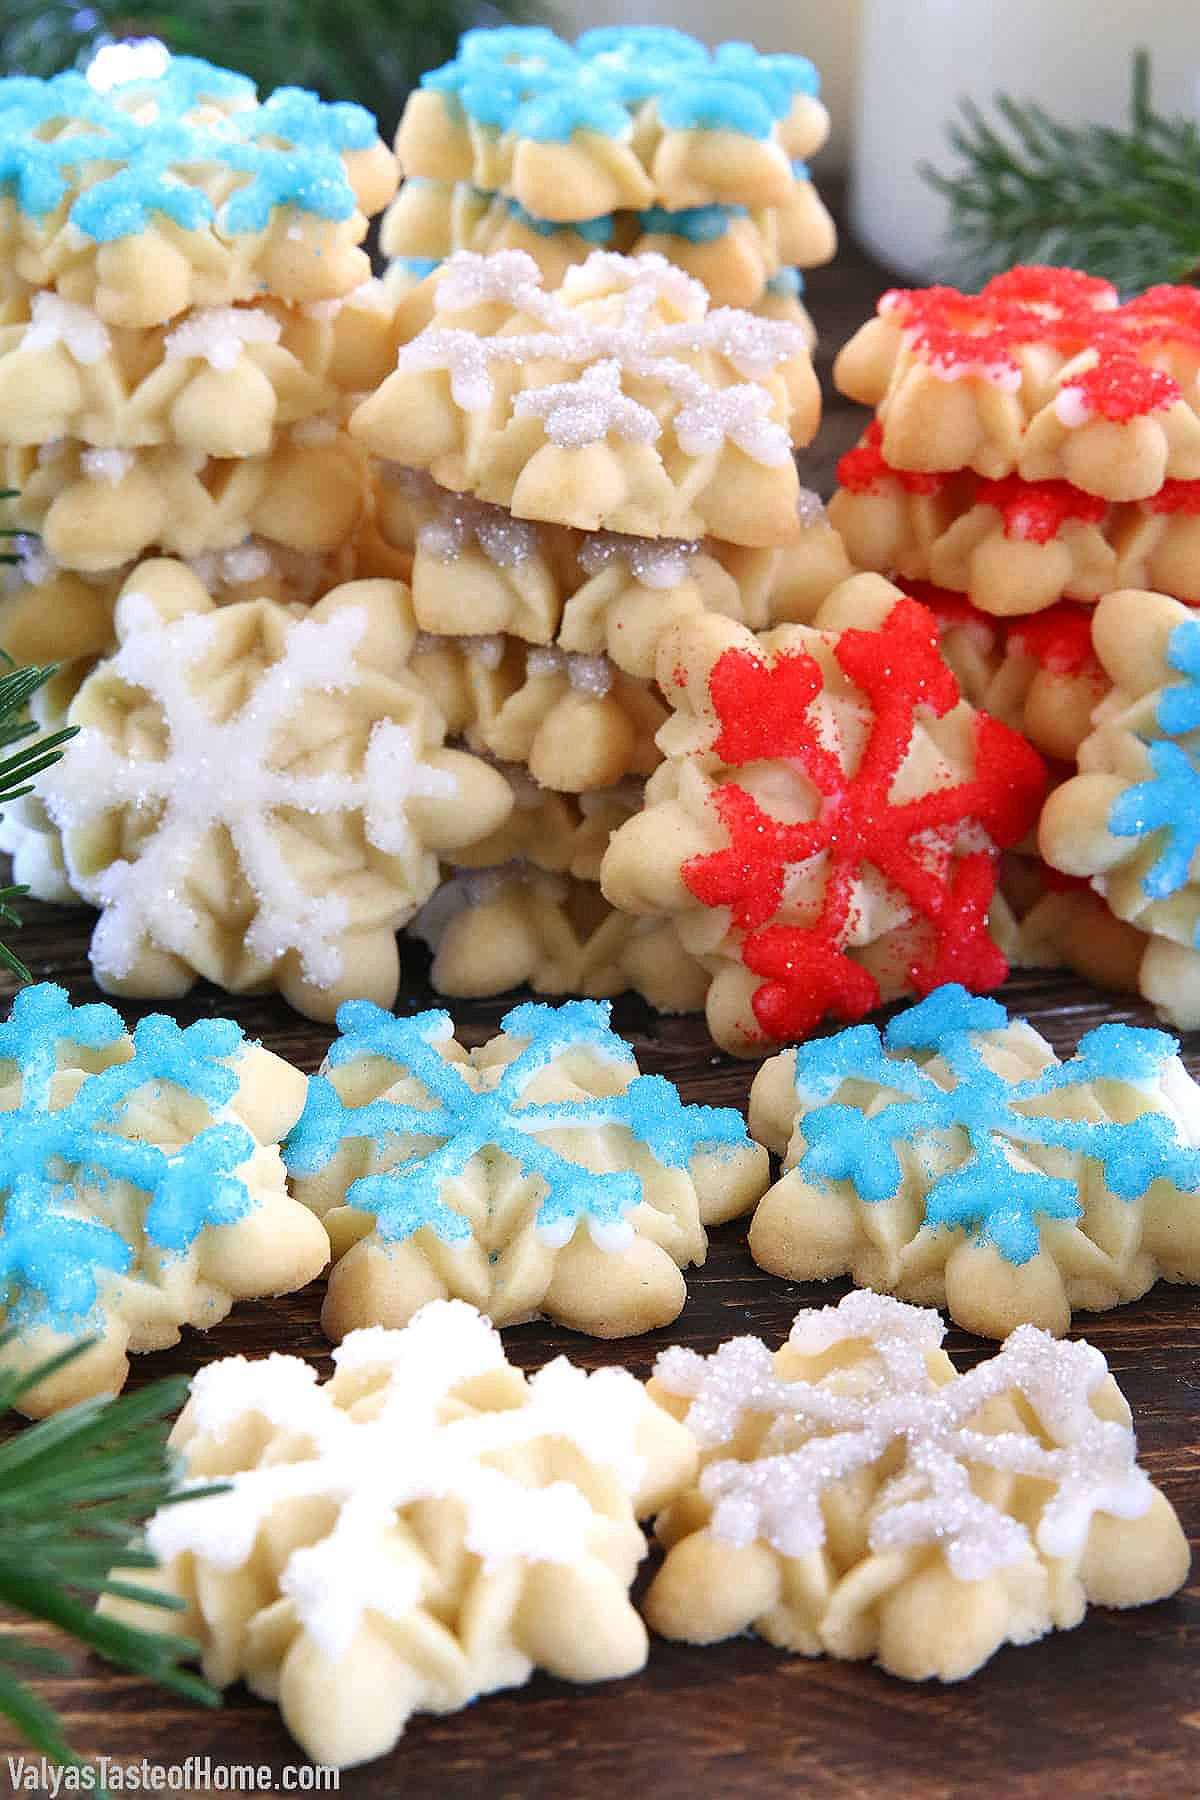 Snowflake Cookies are delicious homemade butter cookies that are then shaped into snowflakes and decorated with edible colored sugar for the most beautiful festive cookies you’ve ever seen!